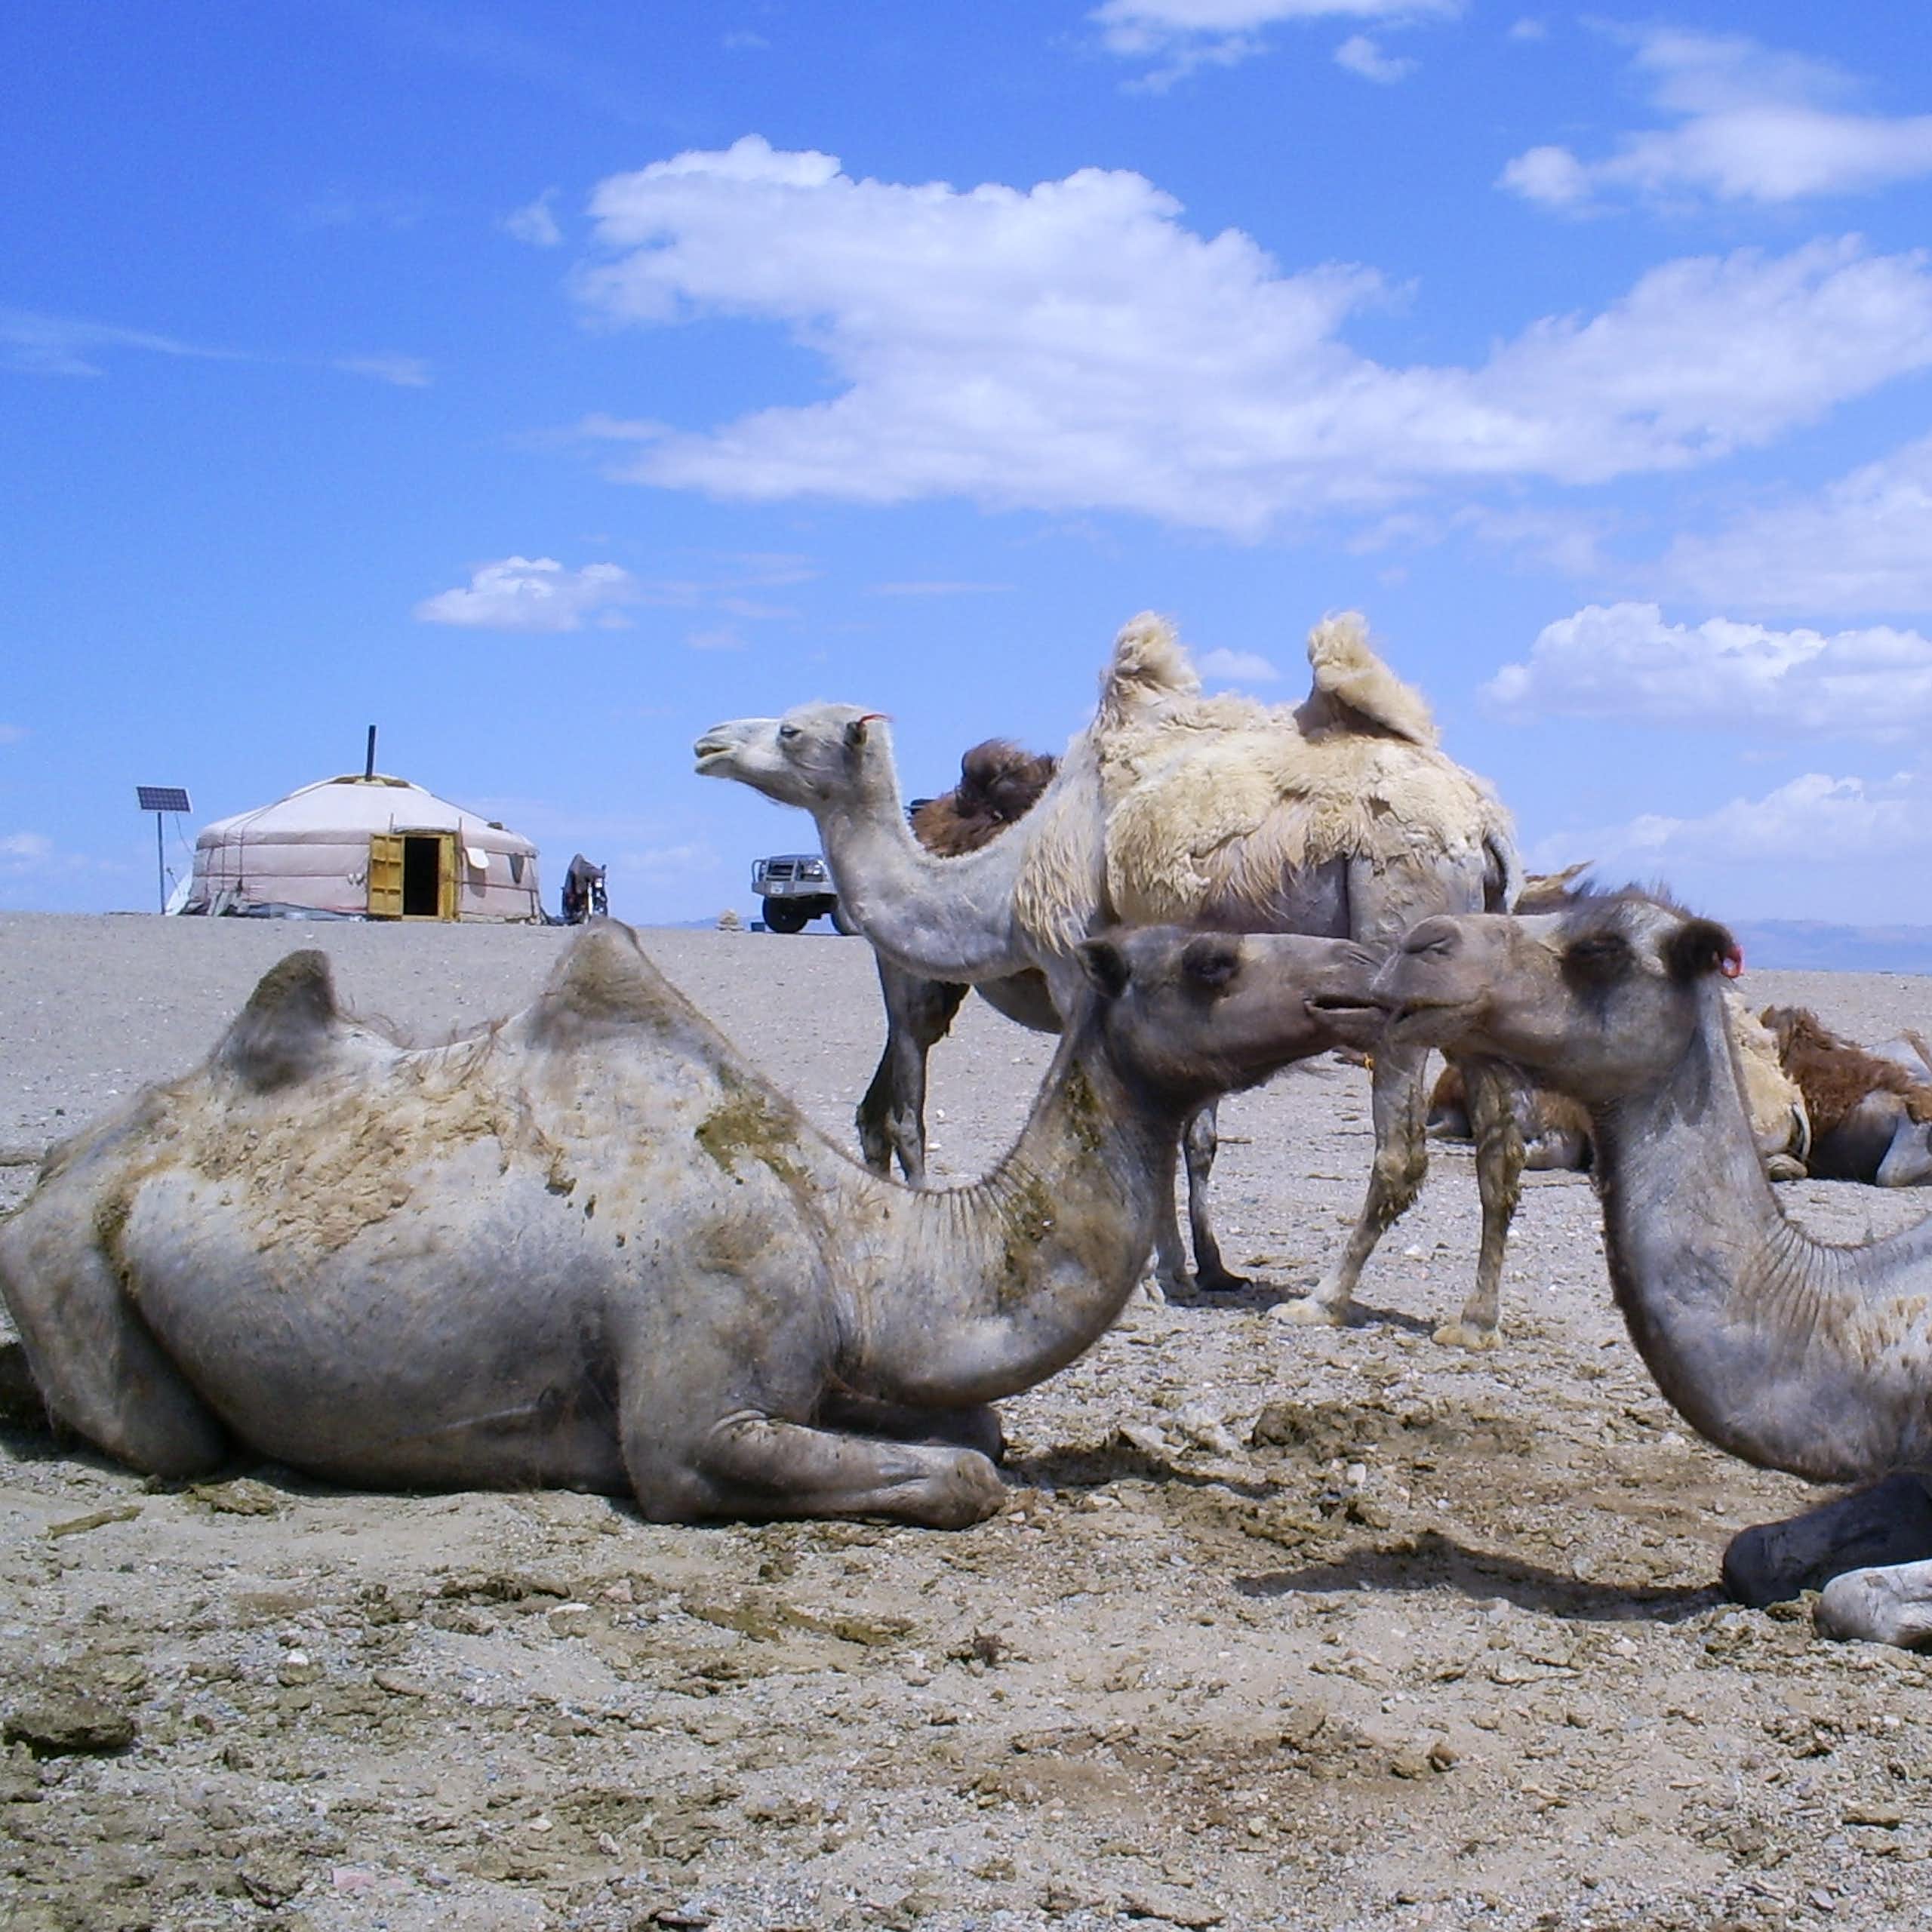 Three two-humped camels on a sandy plain near a yurt 